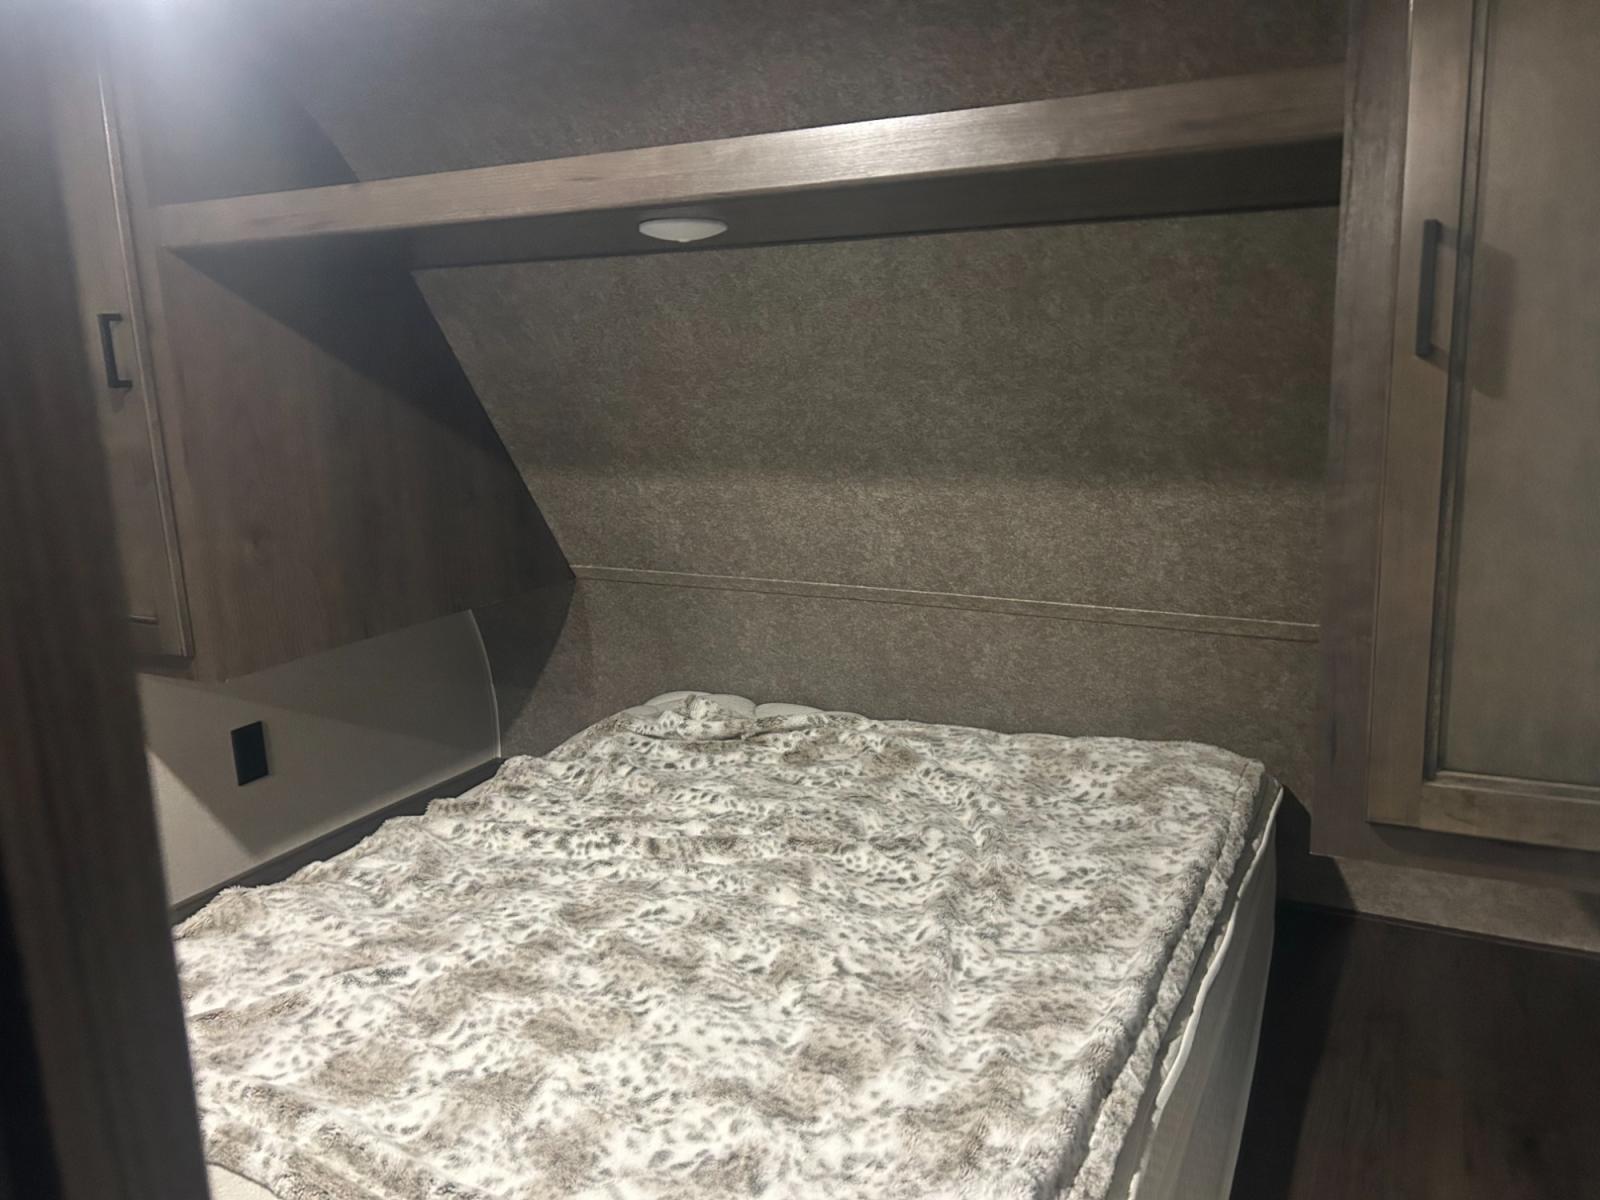 2021 White /TAN Highland Ridge RV, Inc OPEN RANGE 26BHS (58TBH0BP7M1) , located at 17760 Hwy 62, Morris, OK, 74445, 35.609104, -95.877060 - 2021 HIGHLAND RIDGE OPEN RANGE IS PERFECT FOR A SMALL FAMILY OR A LARGE. THIS CAMPER IS 30.5FT LONG AND WILL SLEEP 10 PEOPLE. FEATURES A 16FT POWER AWNING, OUTSIDE STORAGE, DOUBLE AXEL, SINGLE SLIDE OUT, POWER HITCH, AND MANUAL JACKS. IN THE FRONT OF THIS CAMPER IS A QUEEN SIZED BED WITH OVERHEAD ST - Photo #20